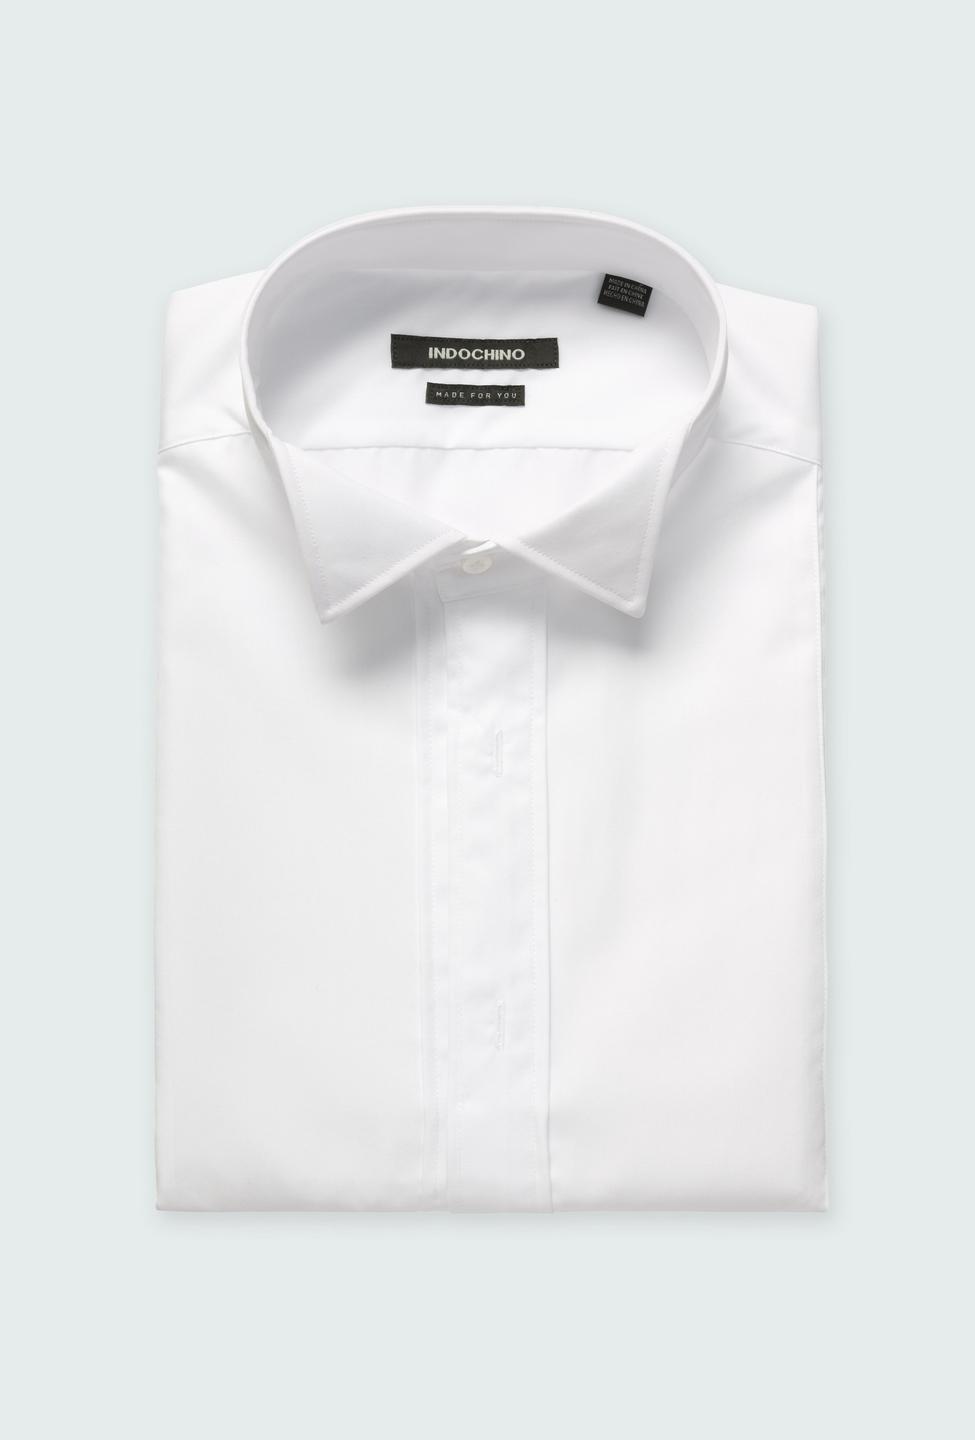 White shirt - Helston Solid Design from Tuxedo Indochino Collection